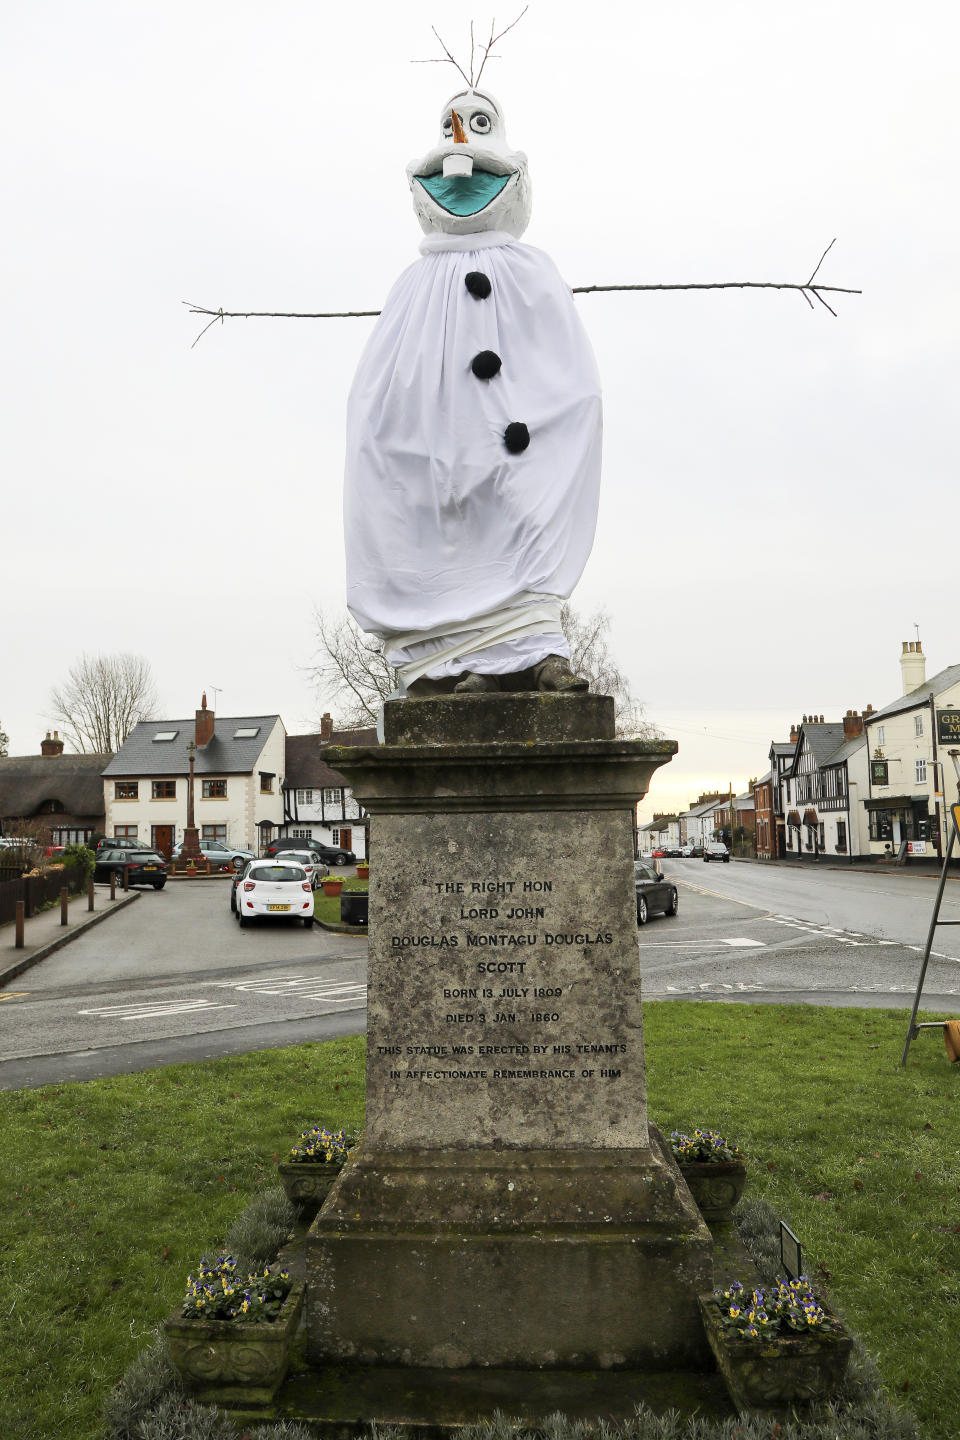 A village is hunting festive pranksters who have turned a statue of its most famous son into PEPPA PIG. The statue of Lord John Scott, who died in 1860, is a Christmas target for jokers in Dunchurch, near Rugby, Warks. Hilarious pictures show the monument draped in a pink sheet with arms stretched out and a huge pink papier mache head resembling kids' TV favourite. The statue has previously been turned into Harry Potter, Shrek, Happy Feet, Pikachu, Homer Simpson, an Olympic athlete and The Grinch in an annual tradition dating back to the 1970s.